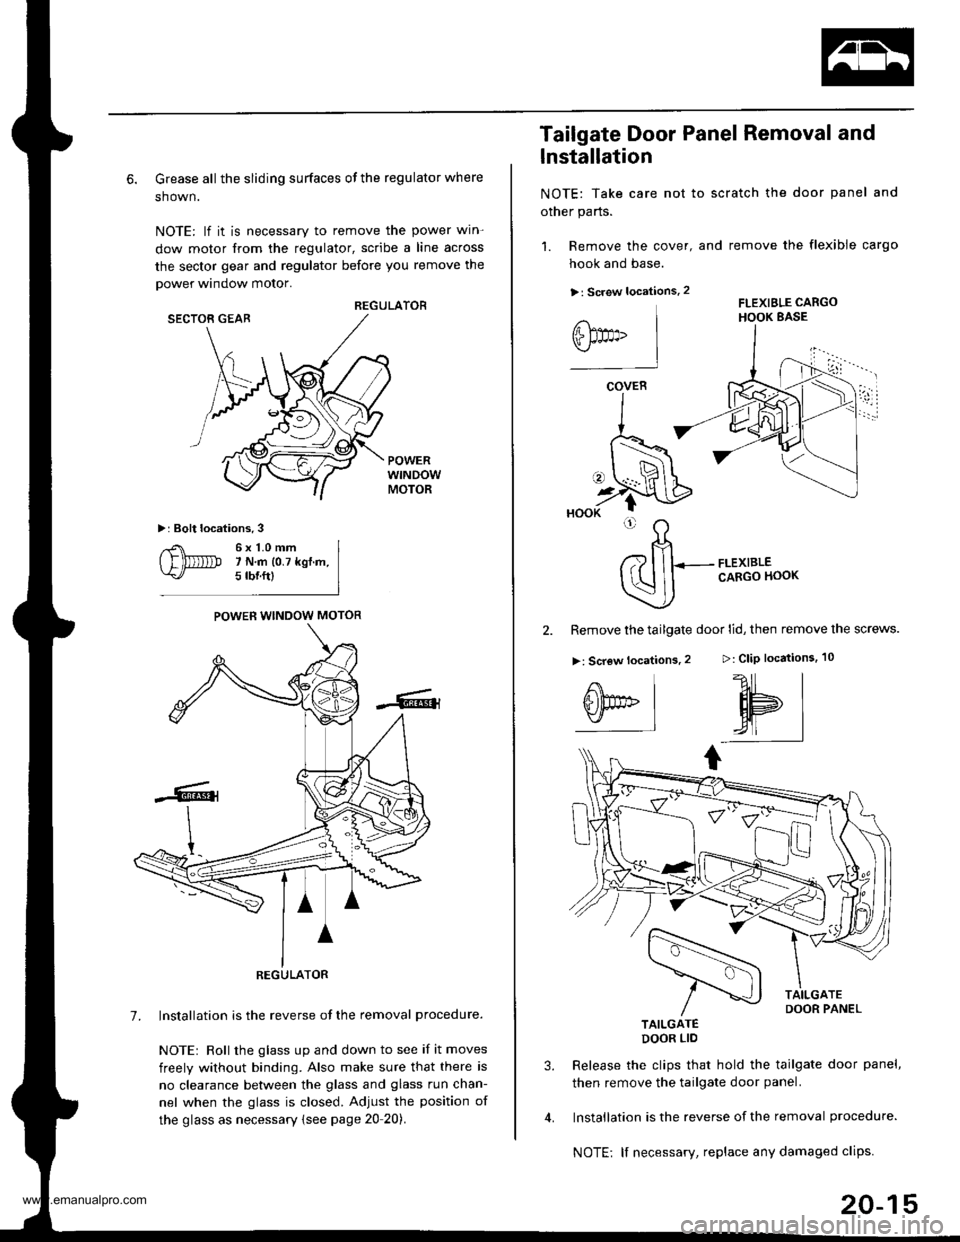 HONDA CR-V 2000 RD1-RD3 / 1.G Workshop Manual 
6. Grease all the sliding surfaces of the regulator where
shown.
NOTE: lf it is necessary to remove the power win-
dow motor from the regulator, scribe a line across
the sector gear and regulator bef